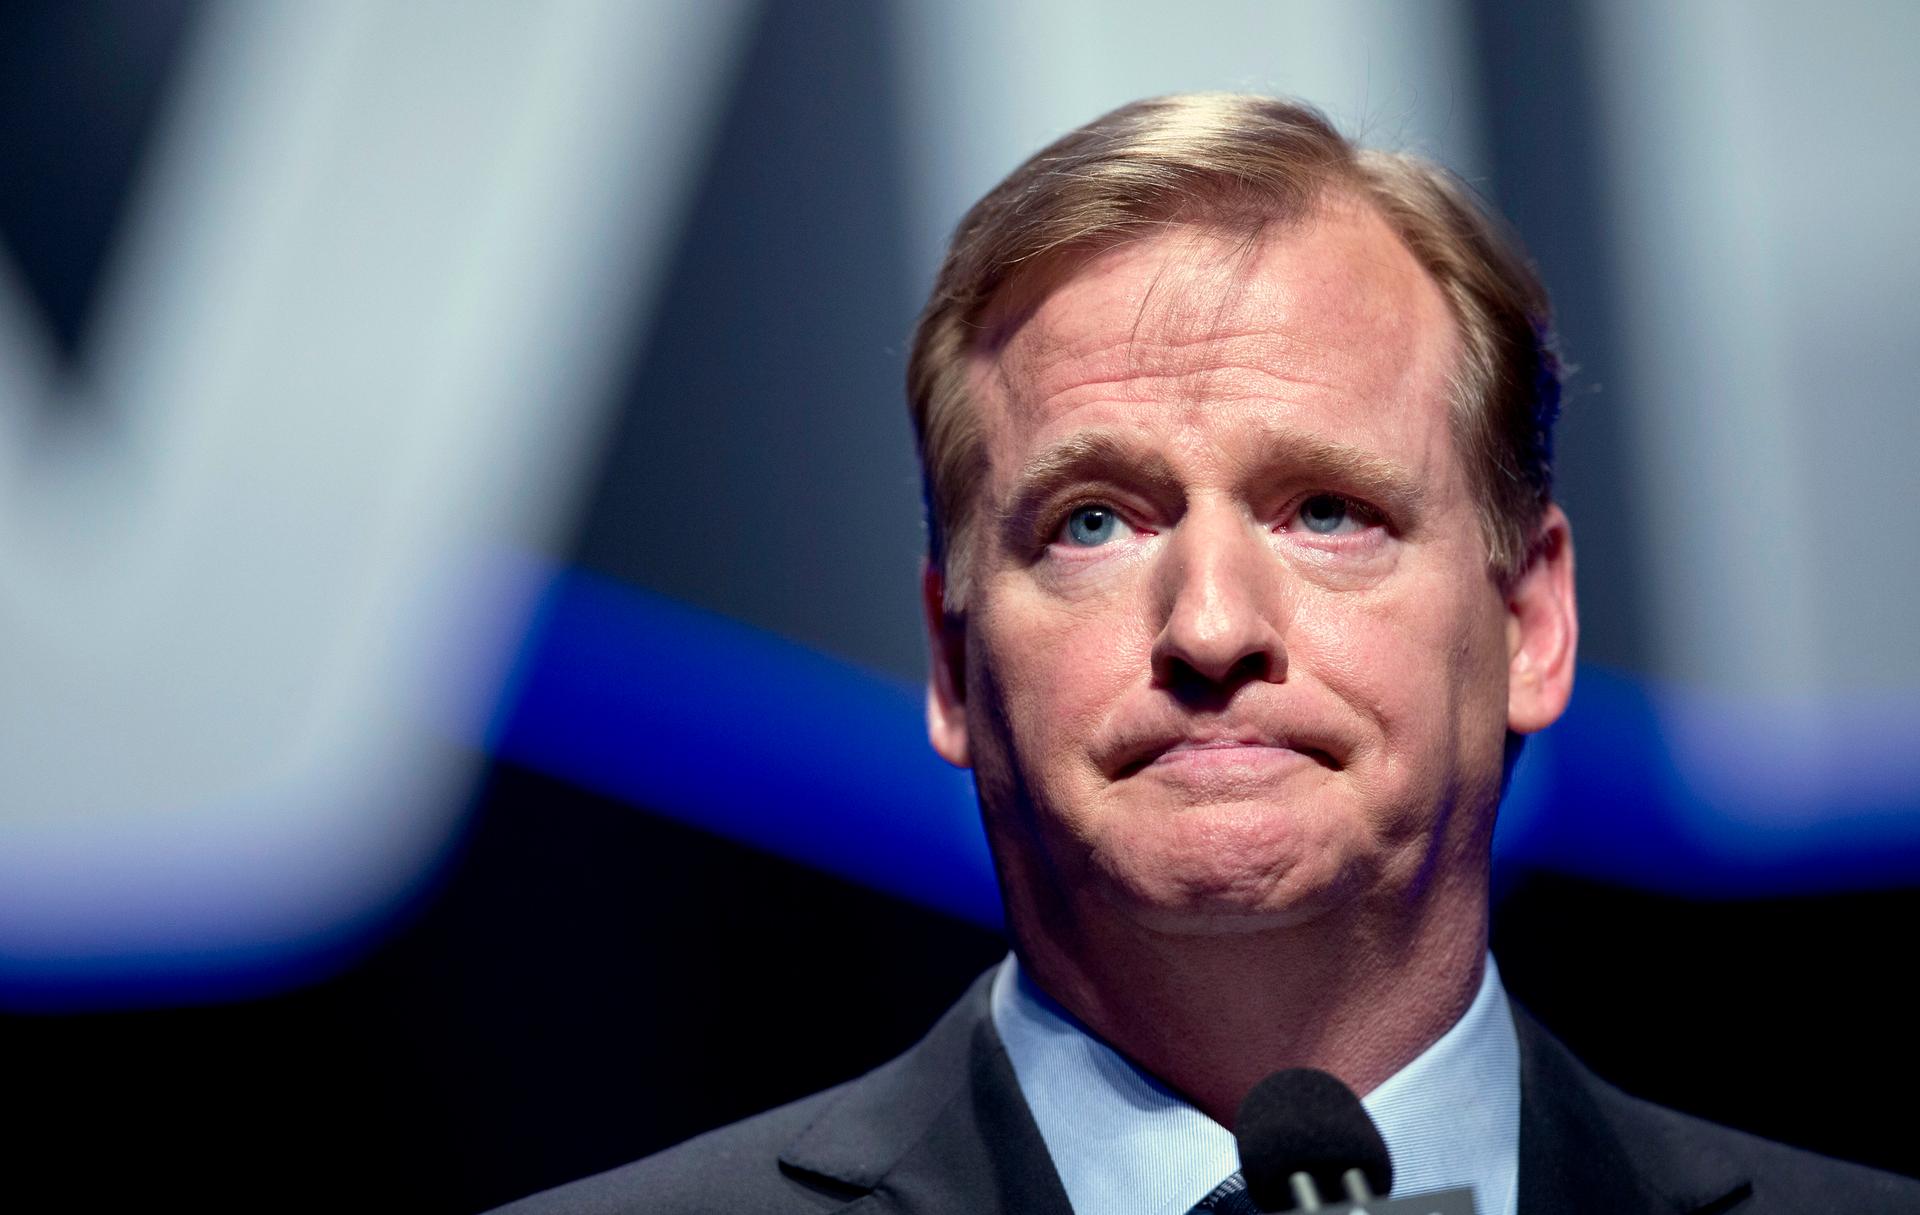 NFL Commissioner Roger Goodell speaks during a news conference ahead of the 2014 Super Bowl.